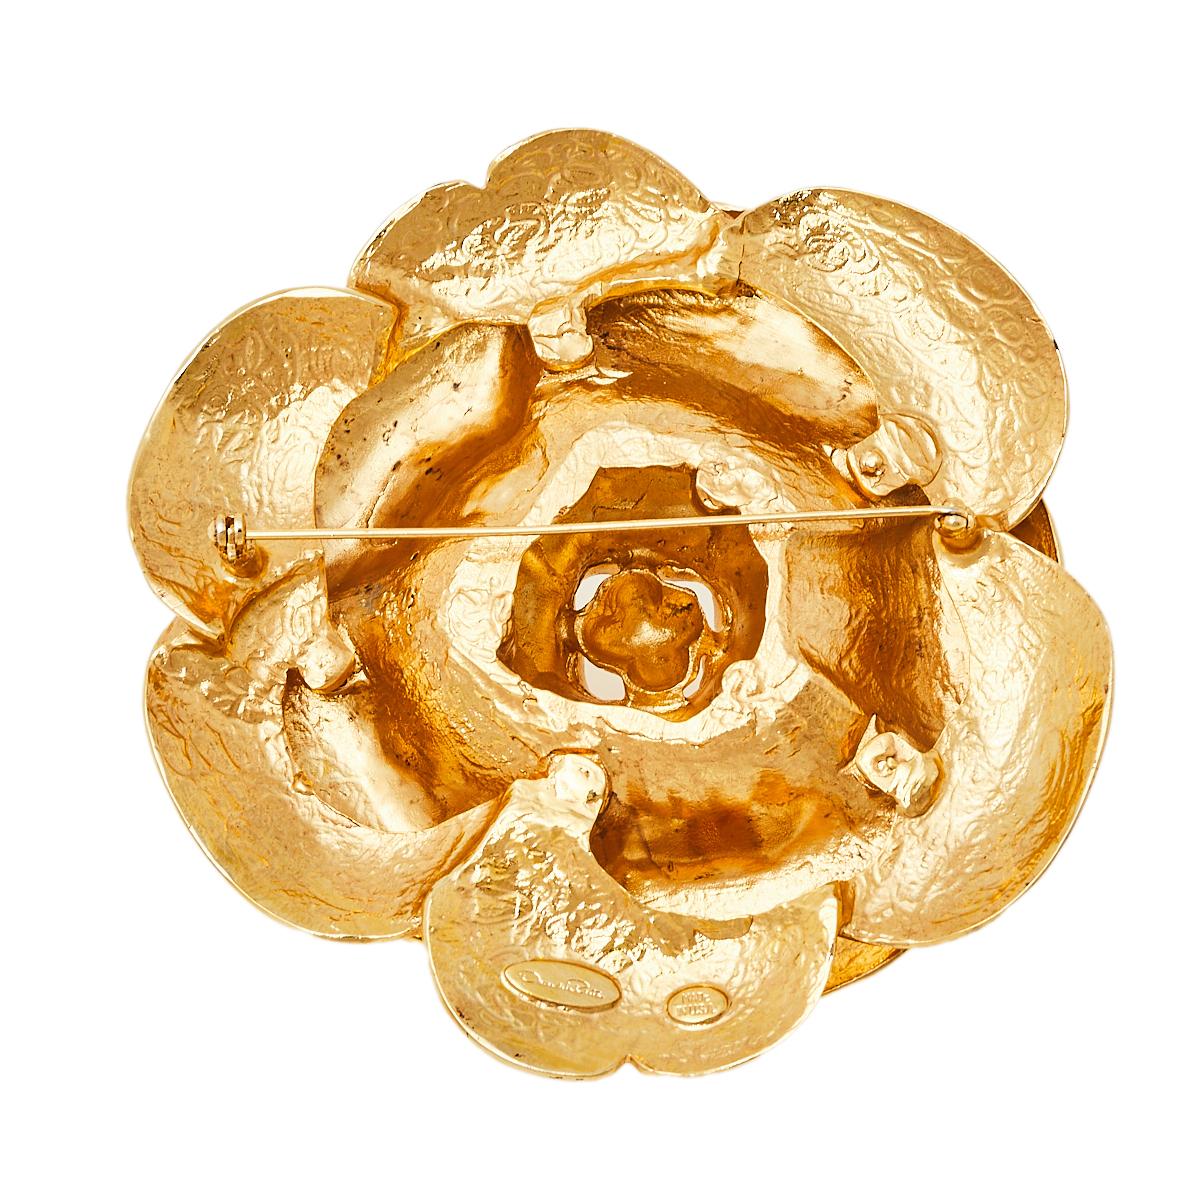 How magnificent is this Rosette Gardenia brooch from Oscar de la Renta! It has been crafted from gold-tone metal into a rose motif that looks lovely. The pin at the back helps you fasten it easily.

Includes: Original Box, Original Dustbag
